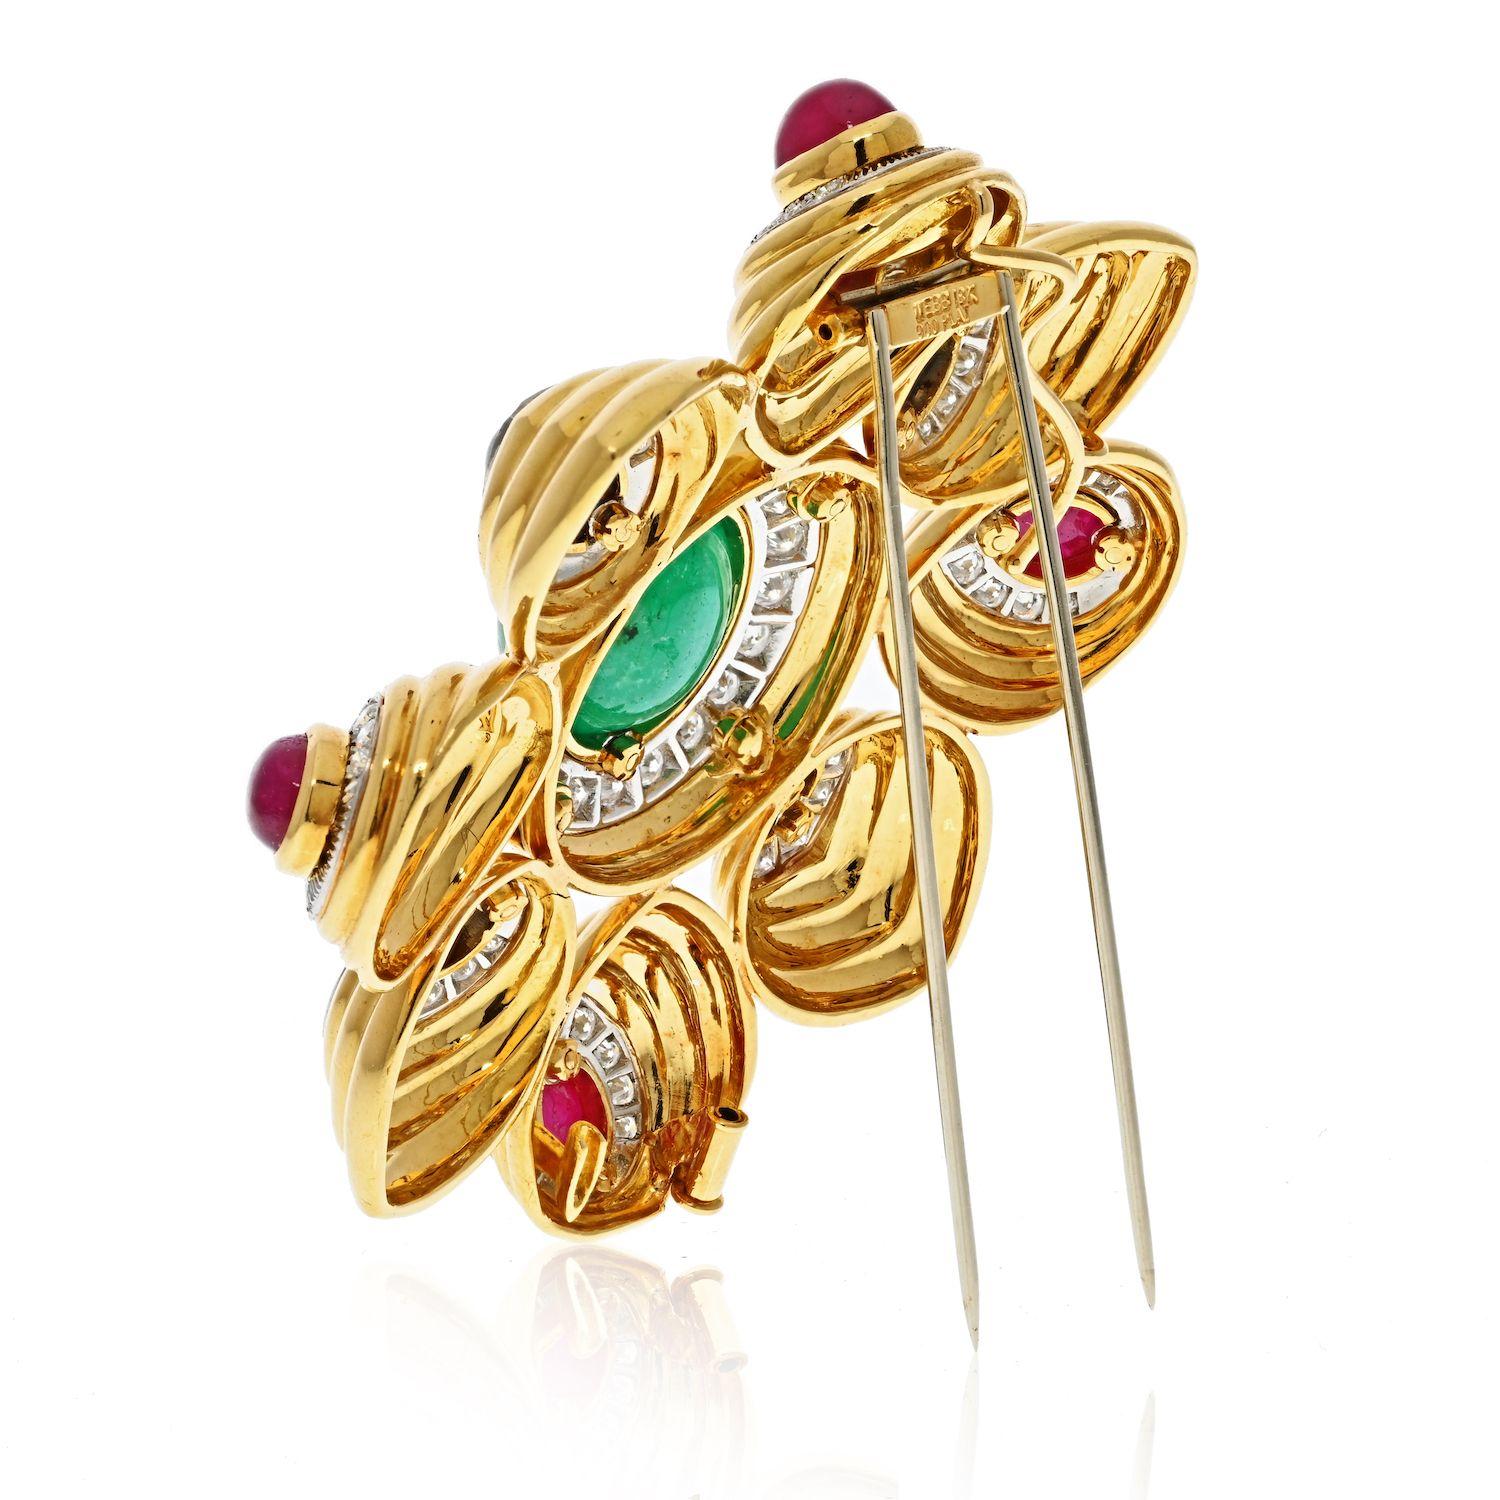 A substantial 18k yellow gold eight pointed combination brooch/pendant with a large center cabochon emerald, and four each of smaller cabochon blue sapphires and cabochon rubies. Brilliant round diamond pave style borders surround each